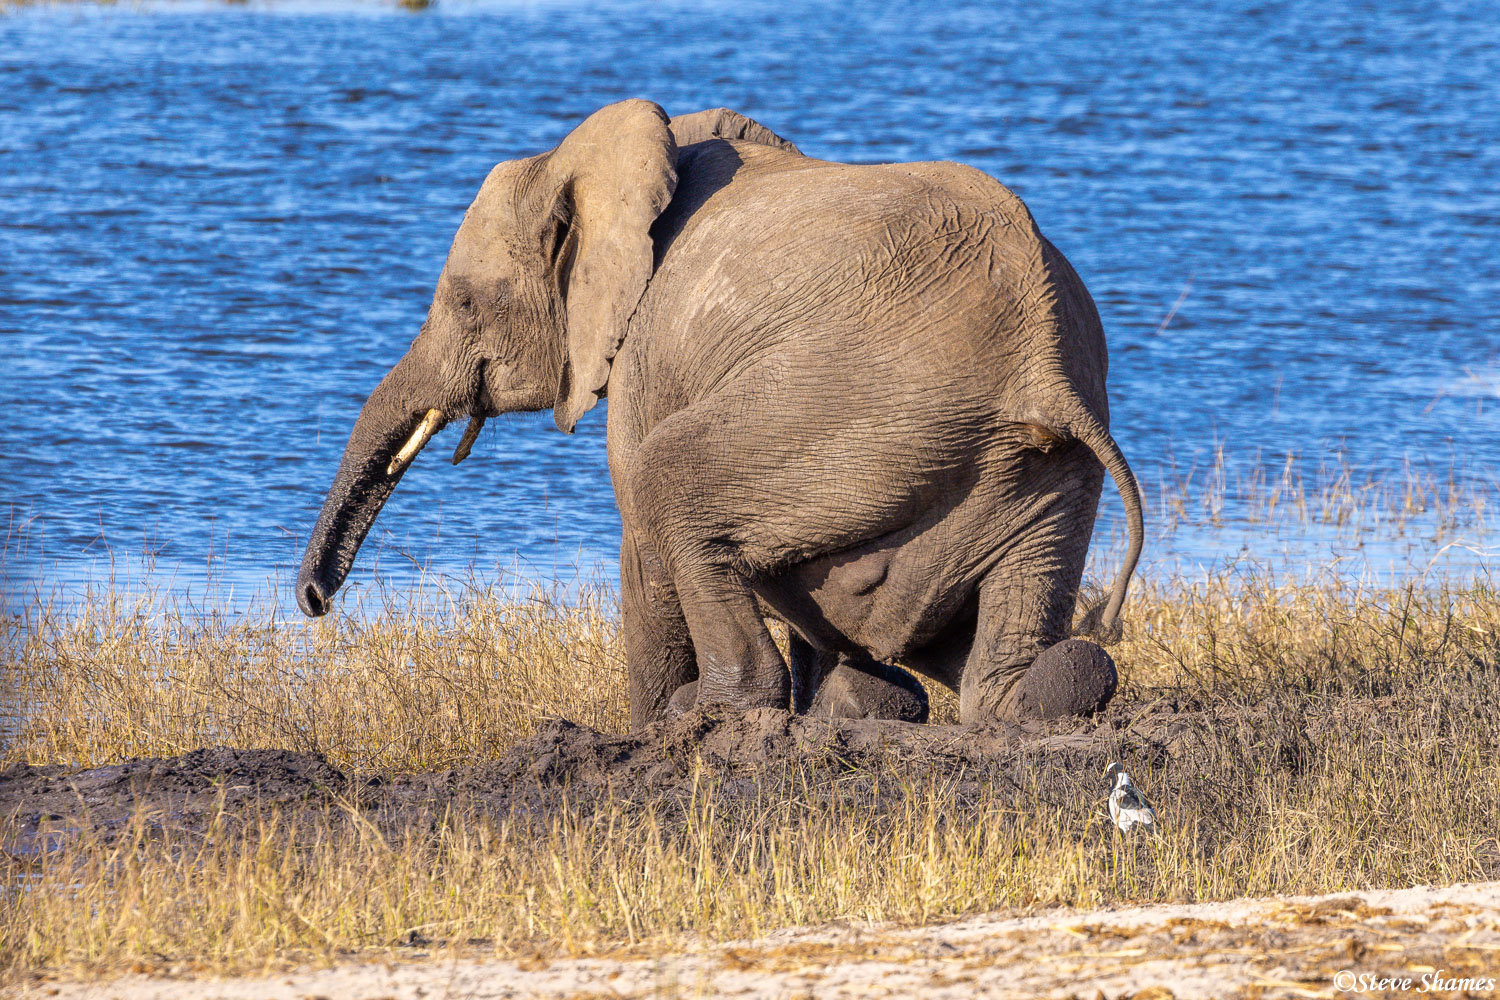 A young elephant at the Chobe River struggling to get on its feet.